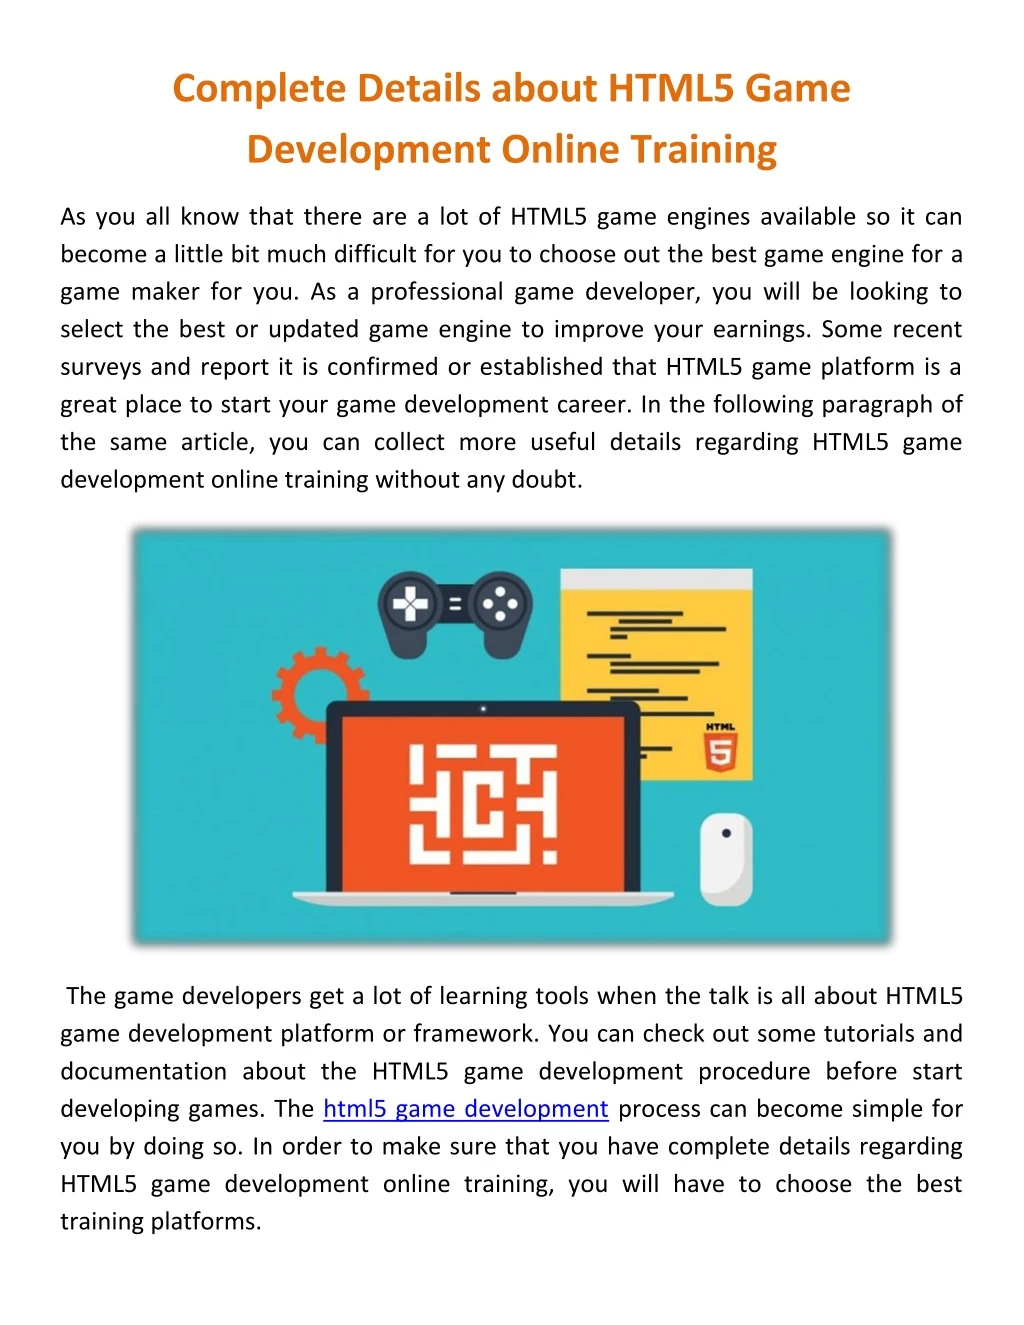 PPT - Complete Details about HTML5 Game Development Online Training ...